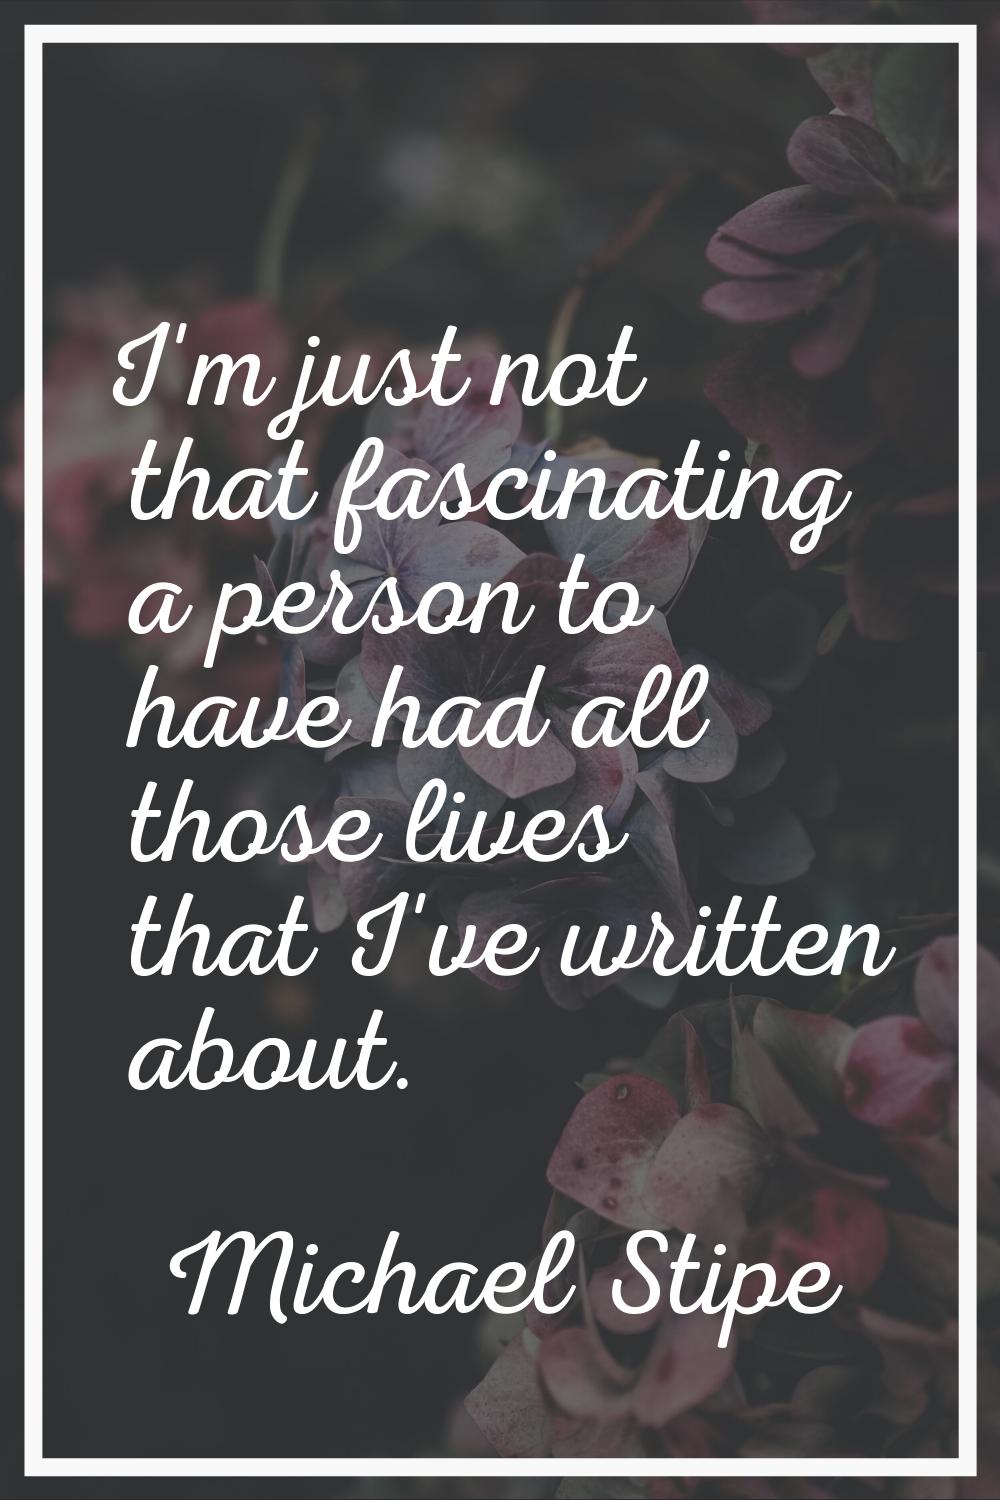 I'm just not that fascinating a person to have had all those lives that I've written about.